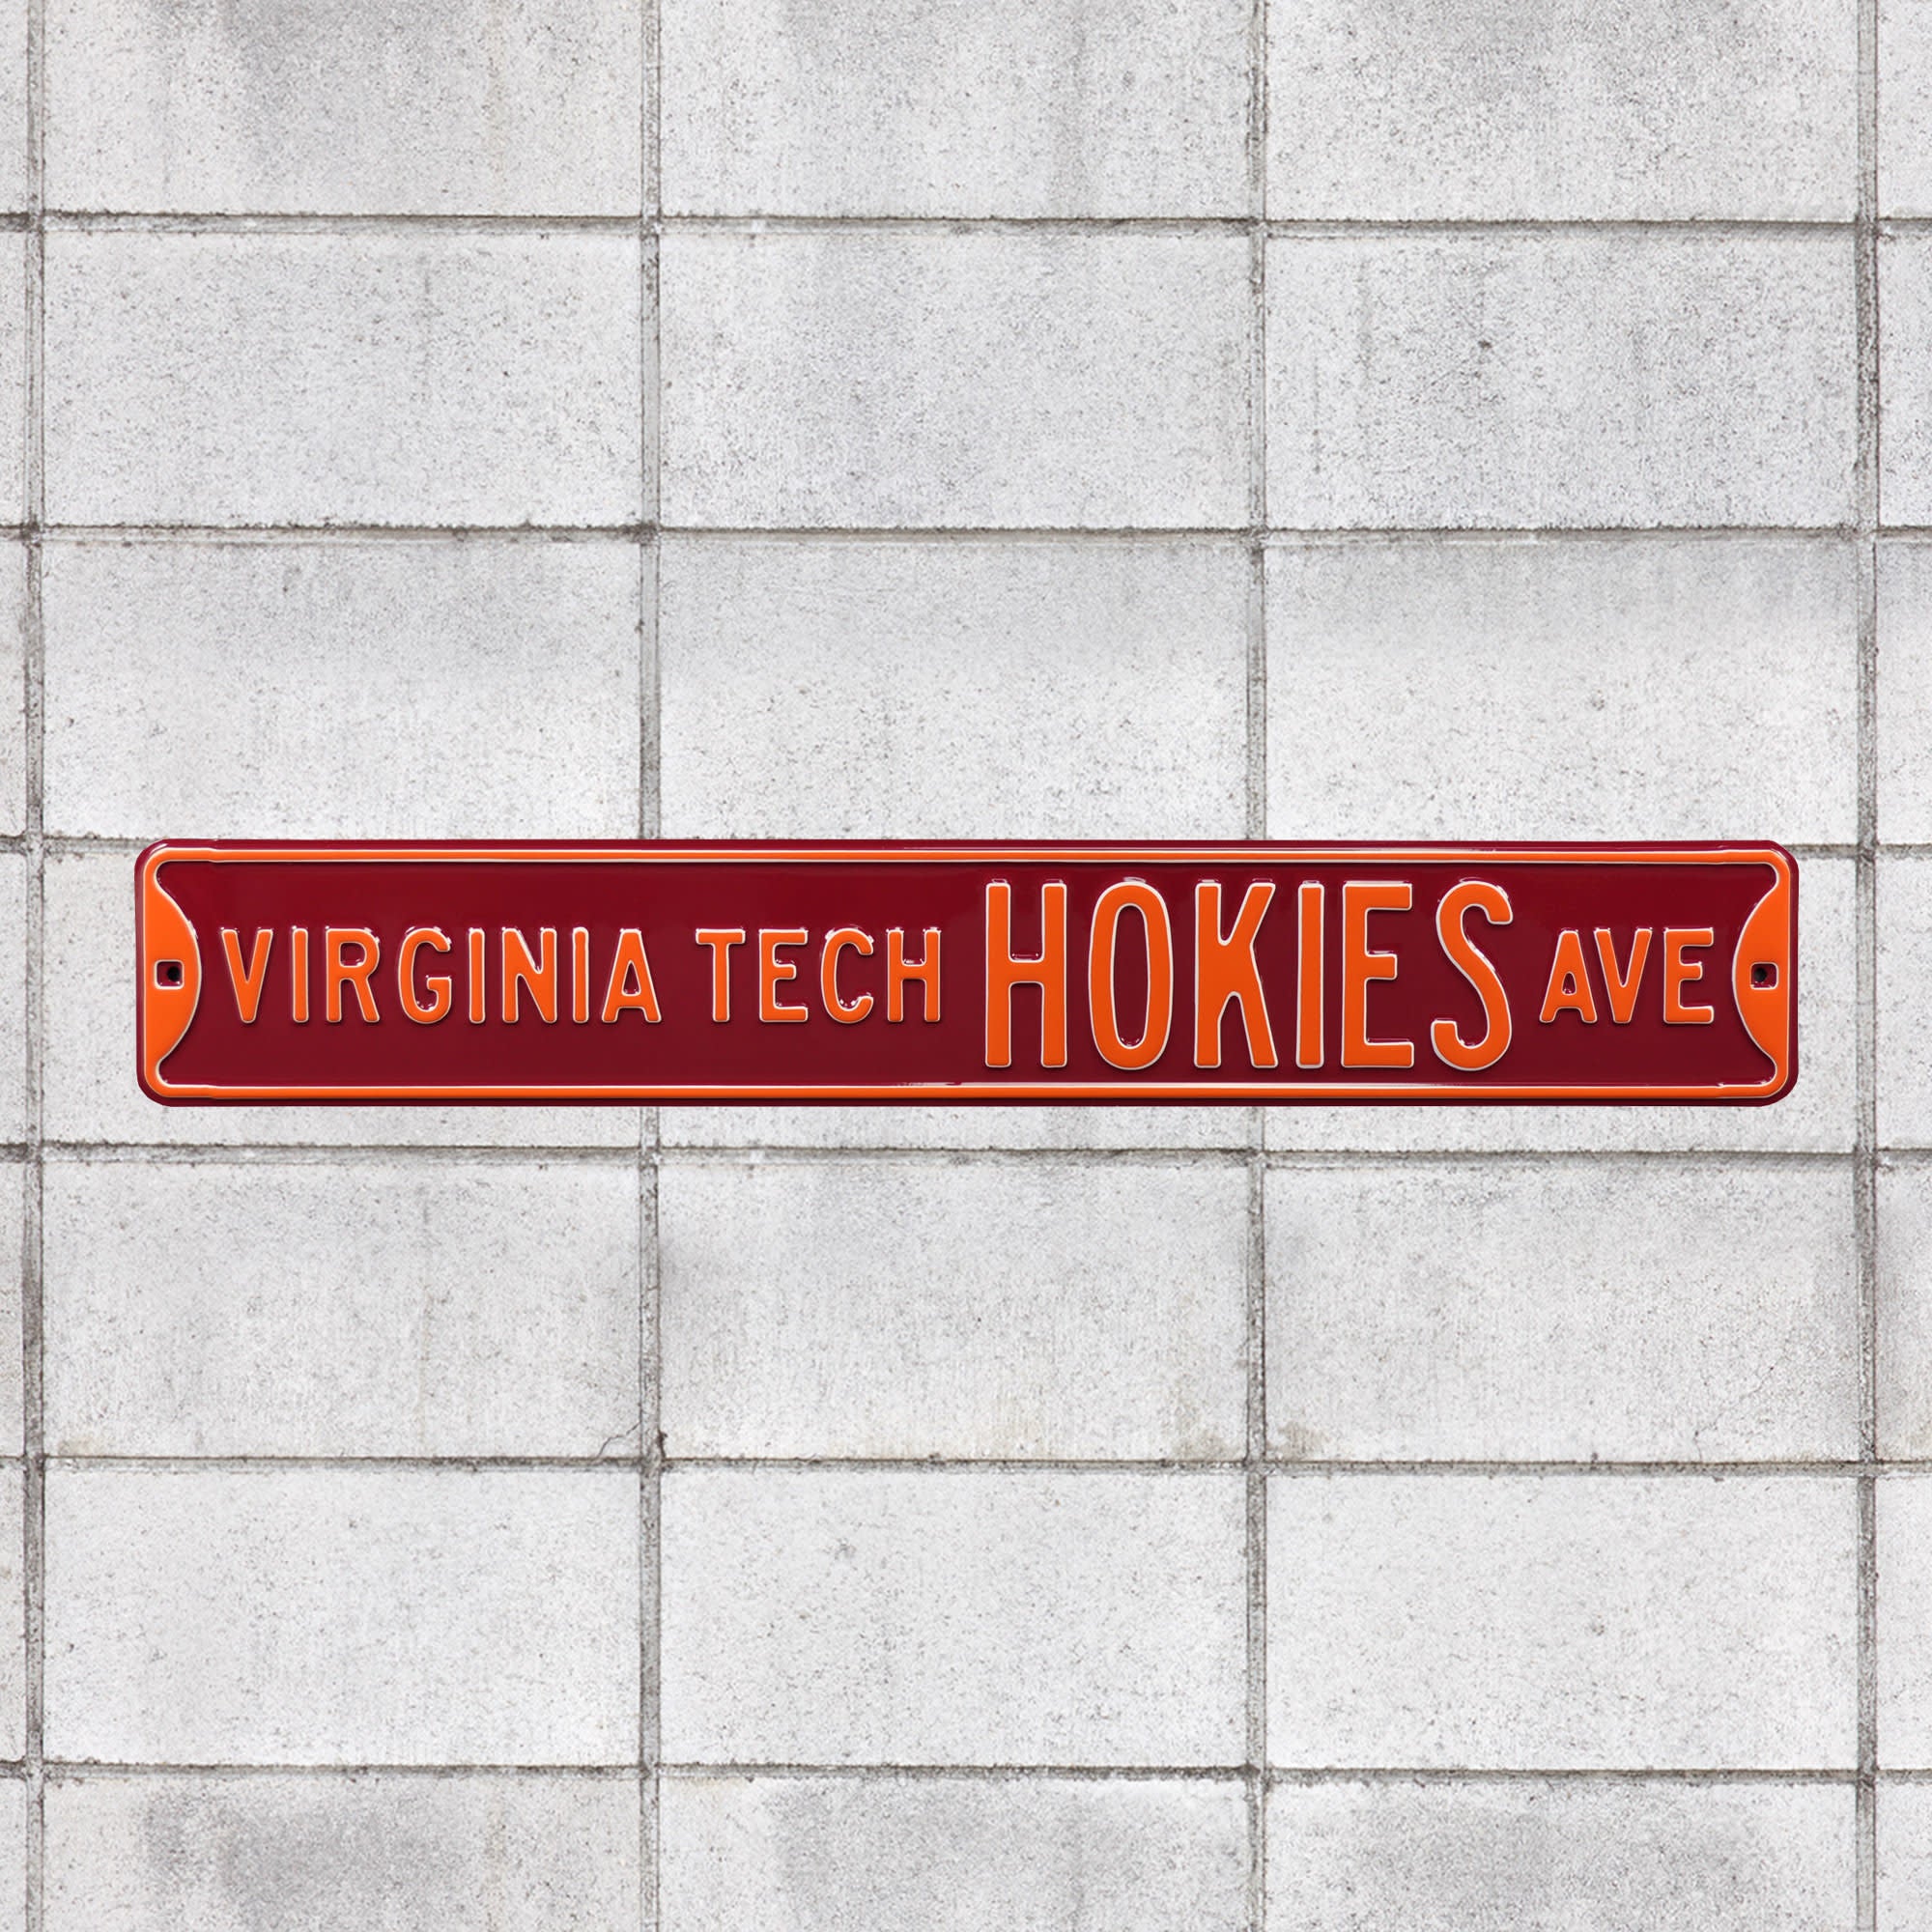 Virginia Tech Hokies: Virginia Tech Hokies Avenue - Officially Licensed Metal Street Sign 36.0"W x 6.0"H by Fathead | 100% Steel